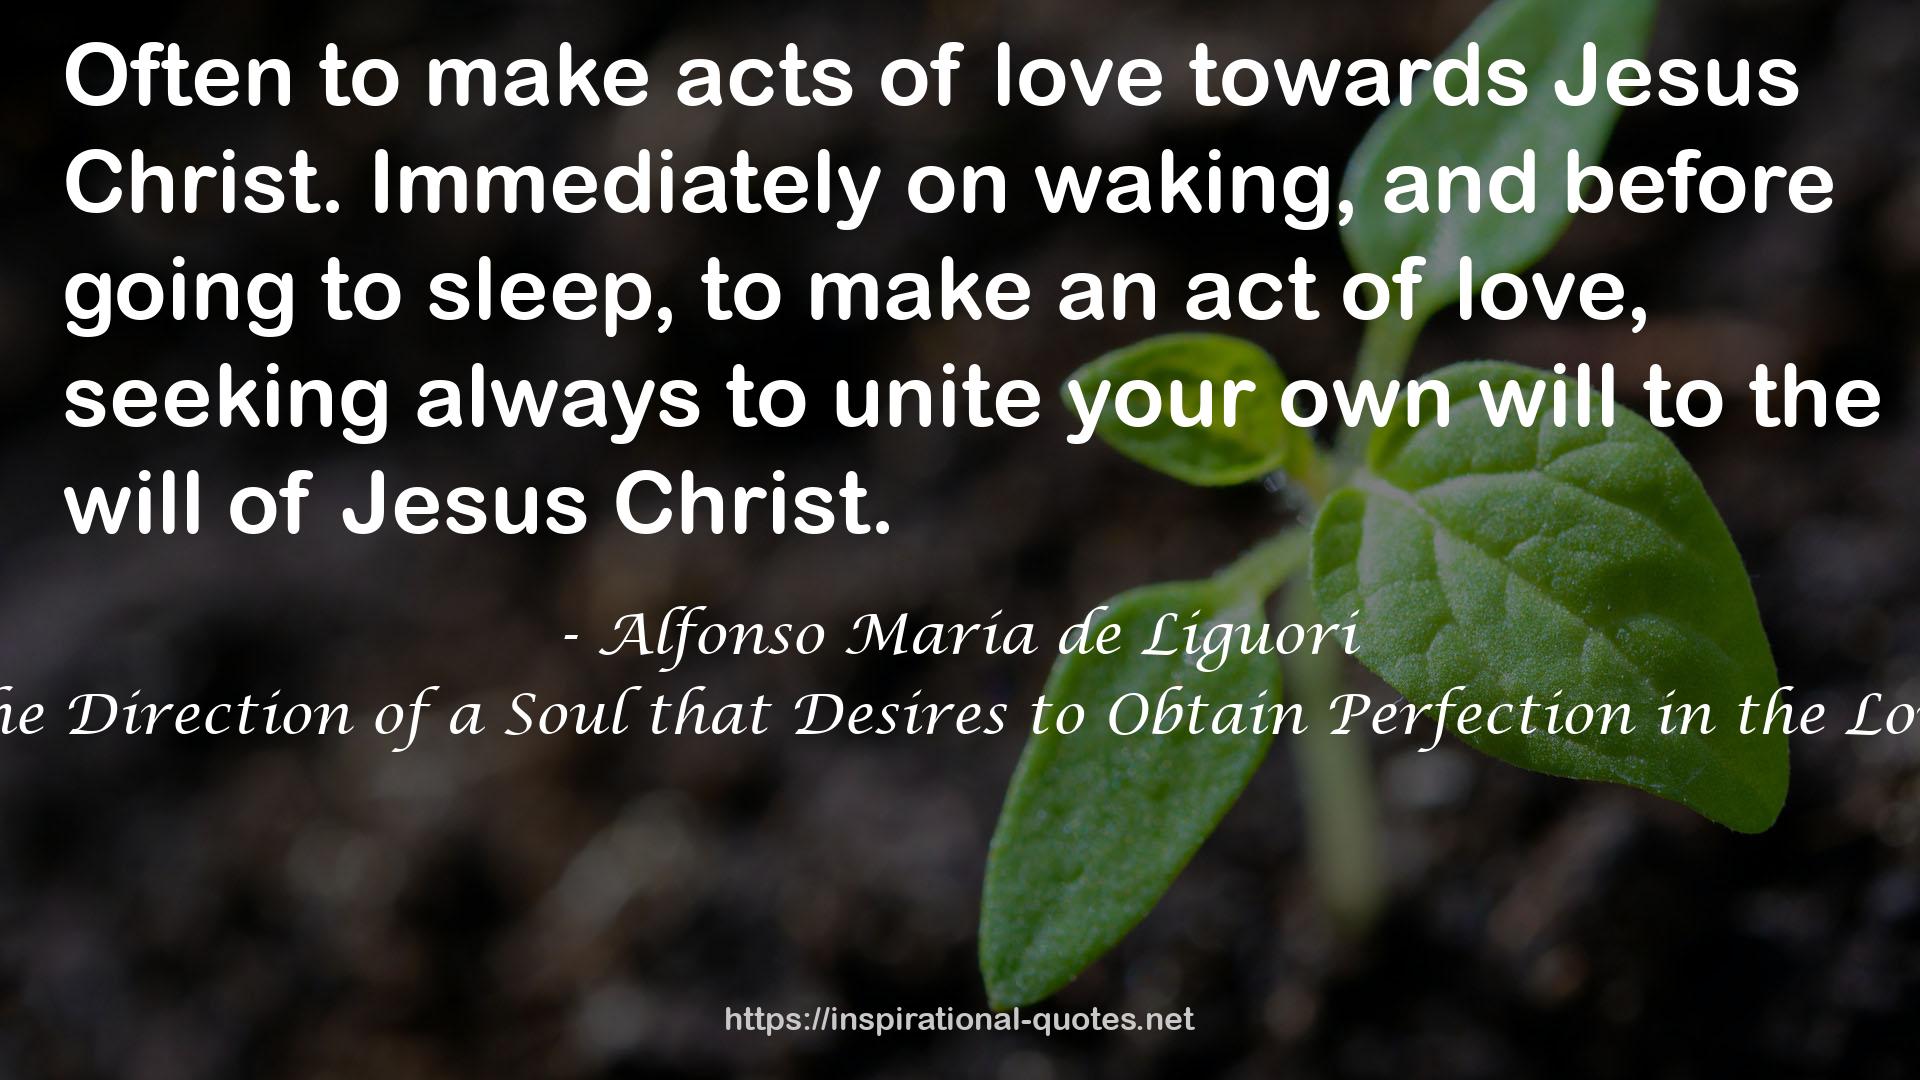 50 Maxims for the Direction of a Soul that Desires to Obtain Perfection in the Love of Jesus Christ QUOTES